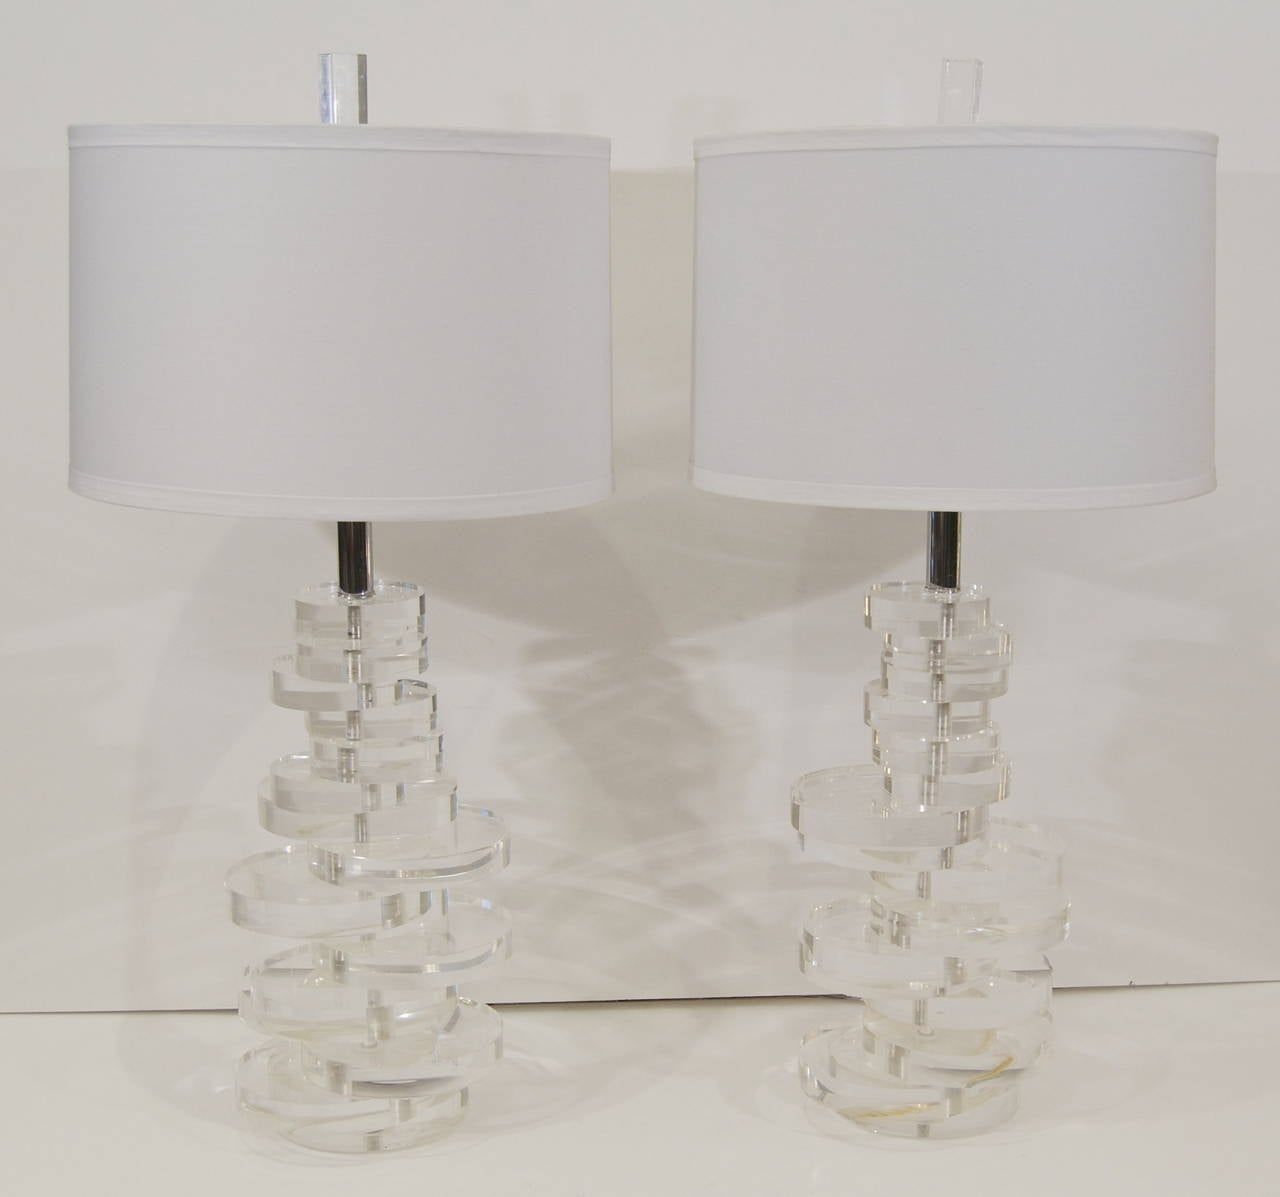 Excellent pair of table lamps of stacked Lucite discs by Marlee. Original finials, chrome hardware. Signed on base.

Three way socket up to 150 watts, new wiring and socket.

Lampshades shown are for demonstration purposes only and are not